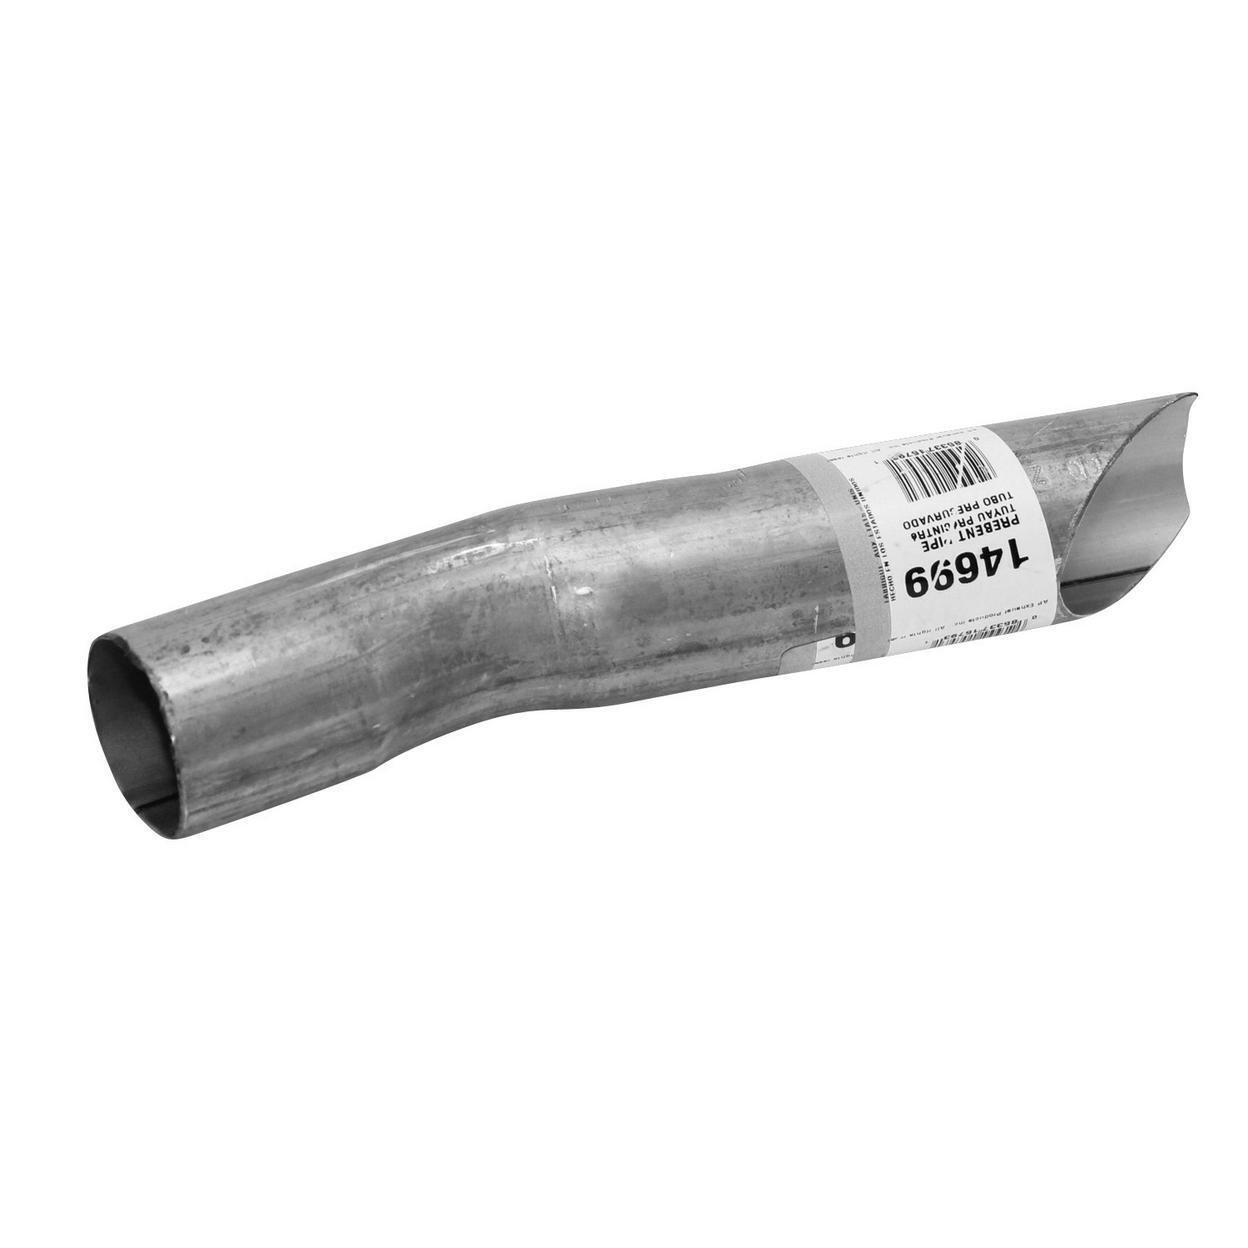 Exhaust Tail Pipe for 1993-1996 Chevrolet Beretta Base 3.1L V6 GAS OHV